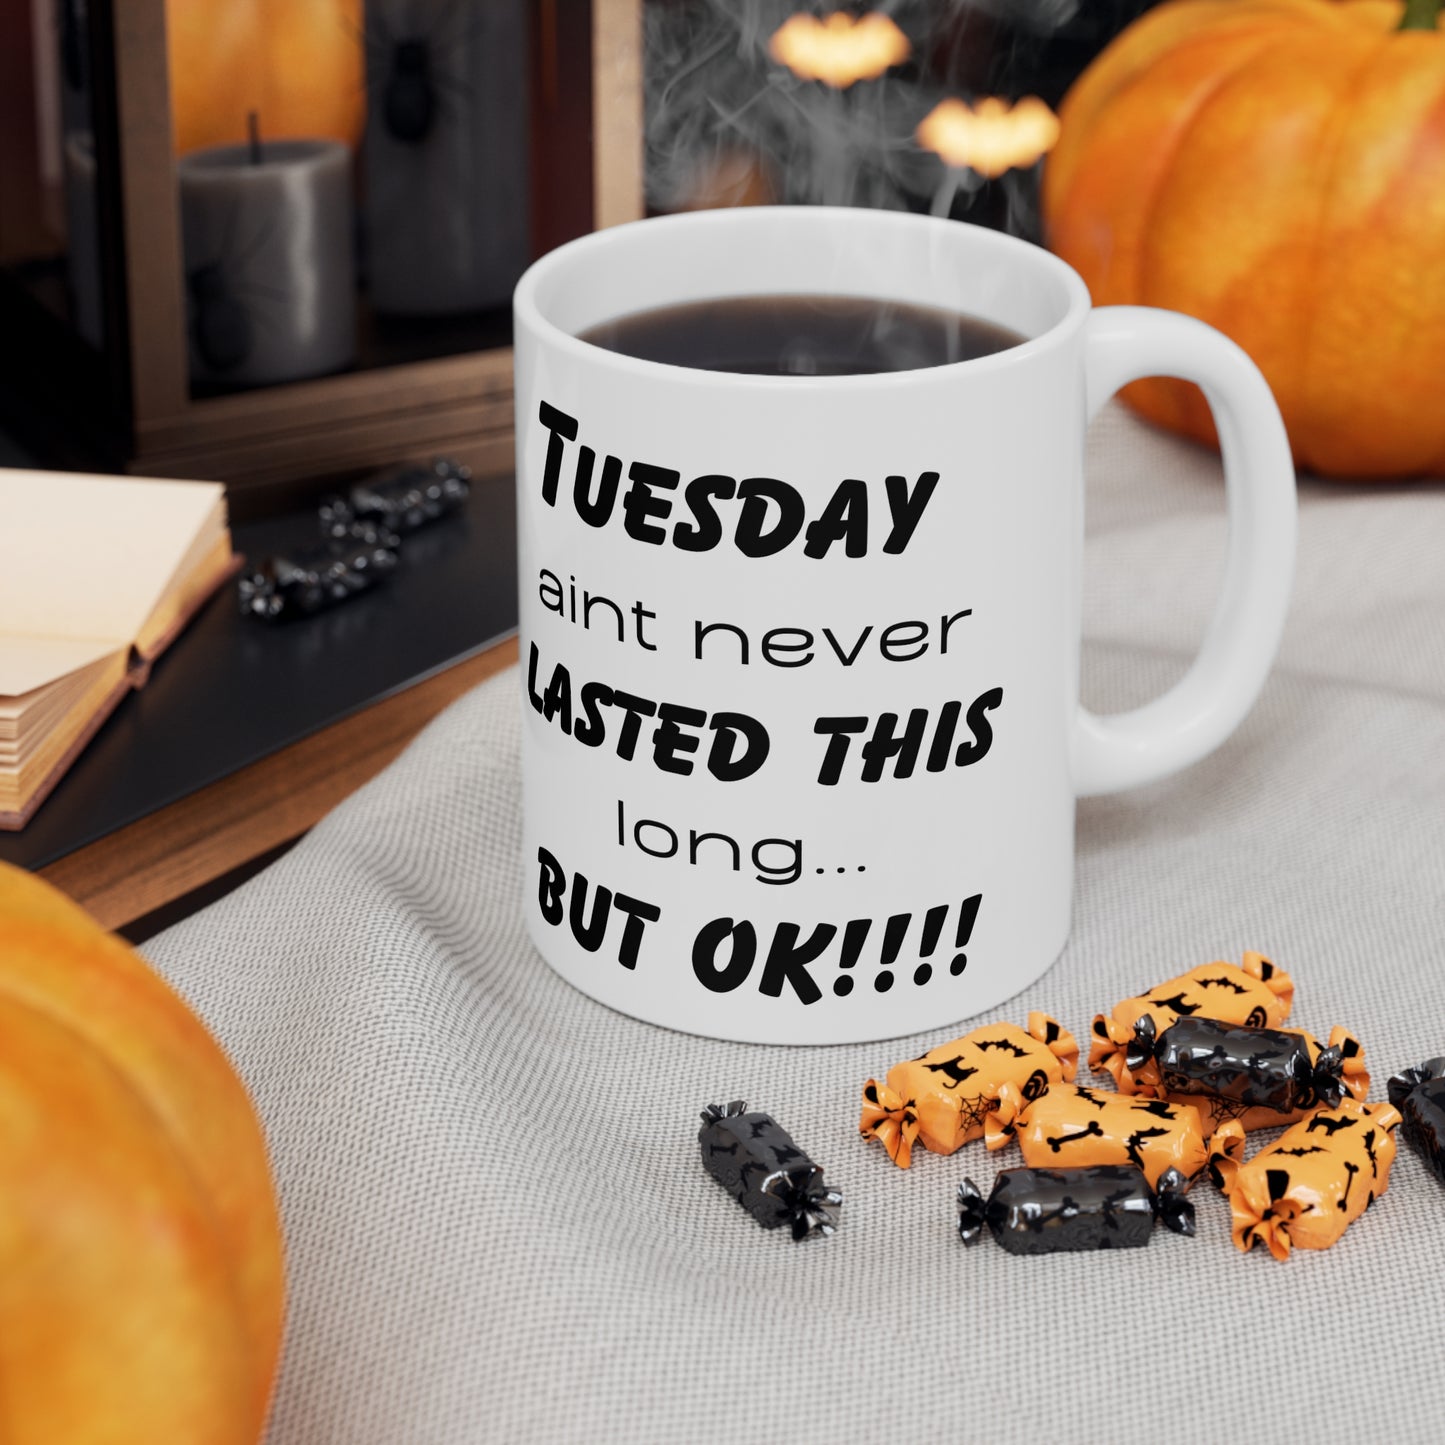 Tuesday ain't never this long ...but ok! Ceramic Coffee Cups, 11oz, 15oz